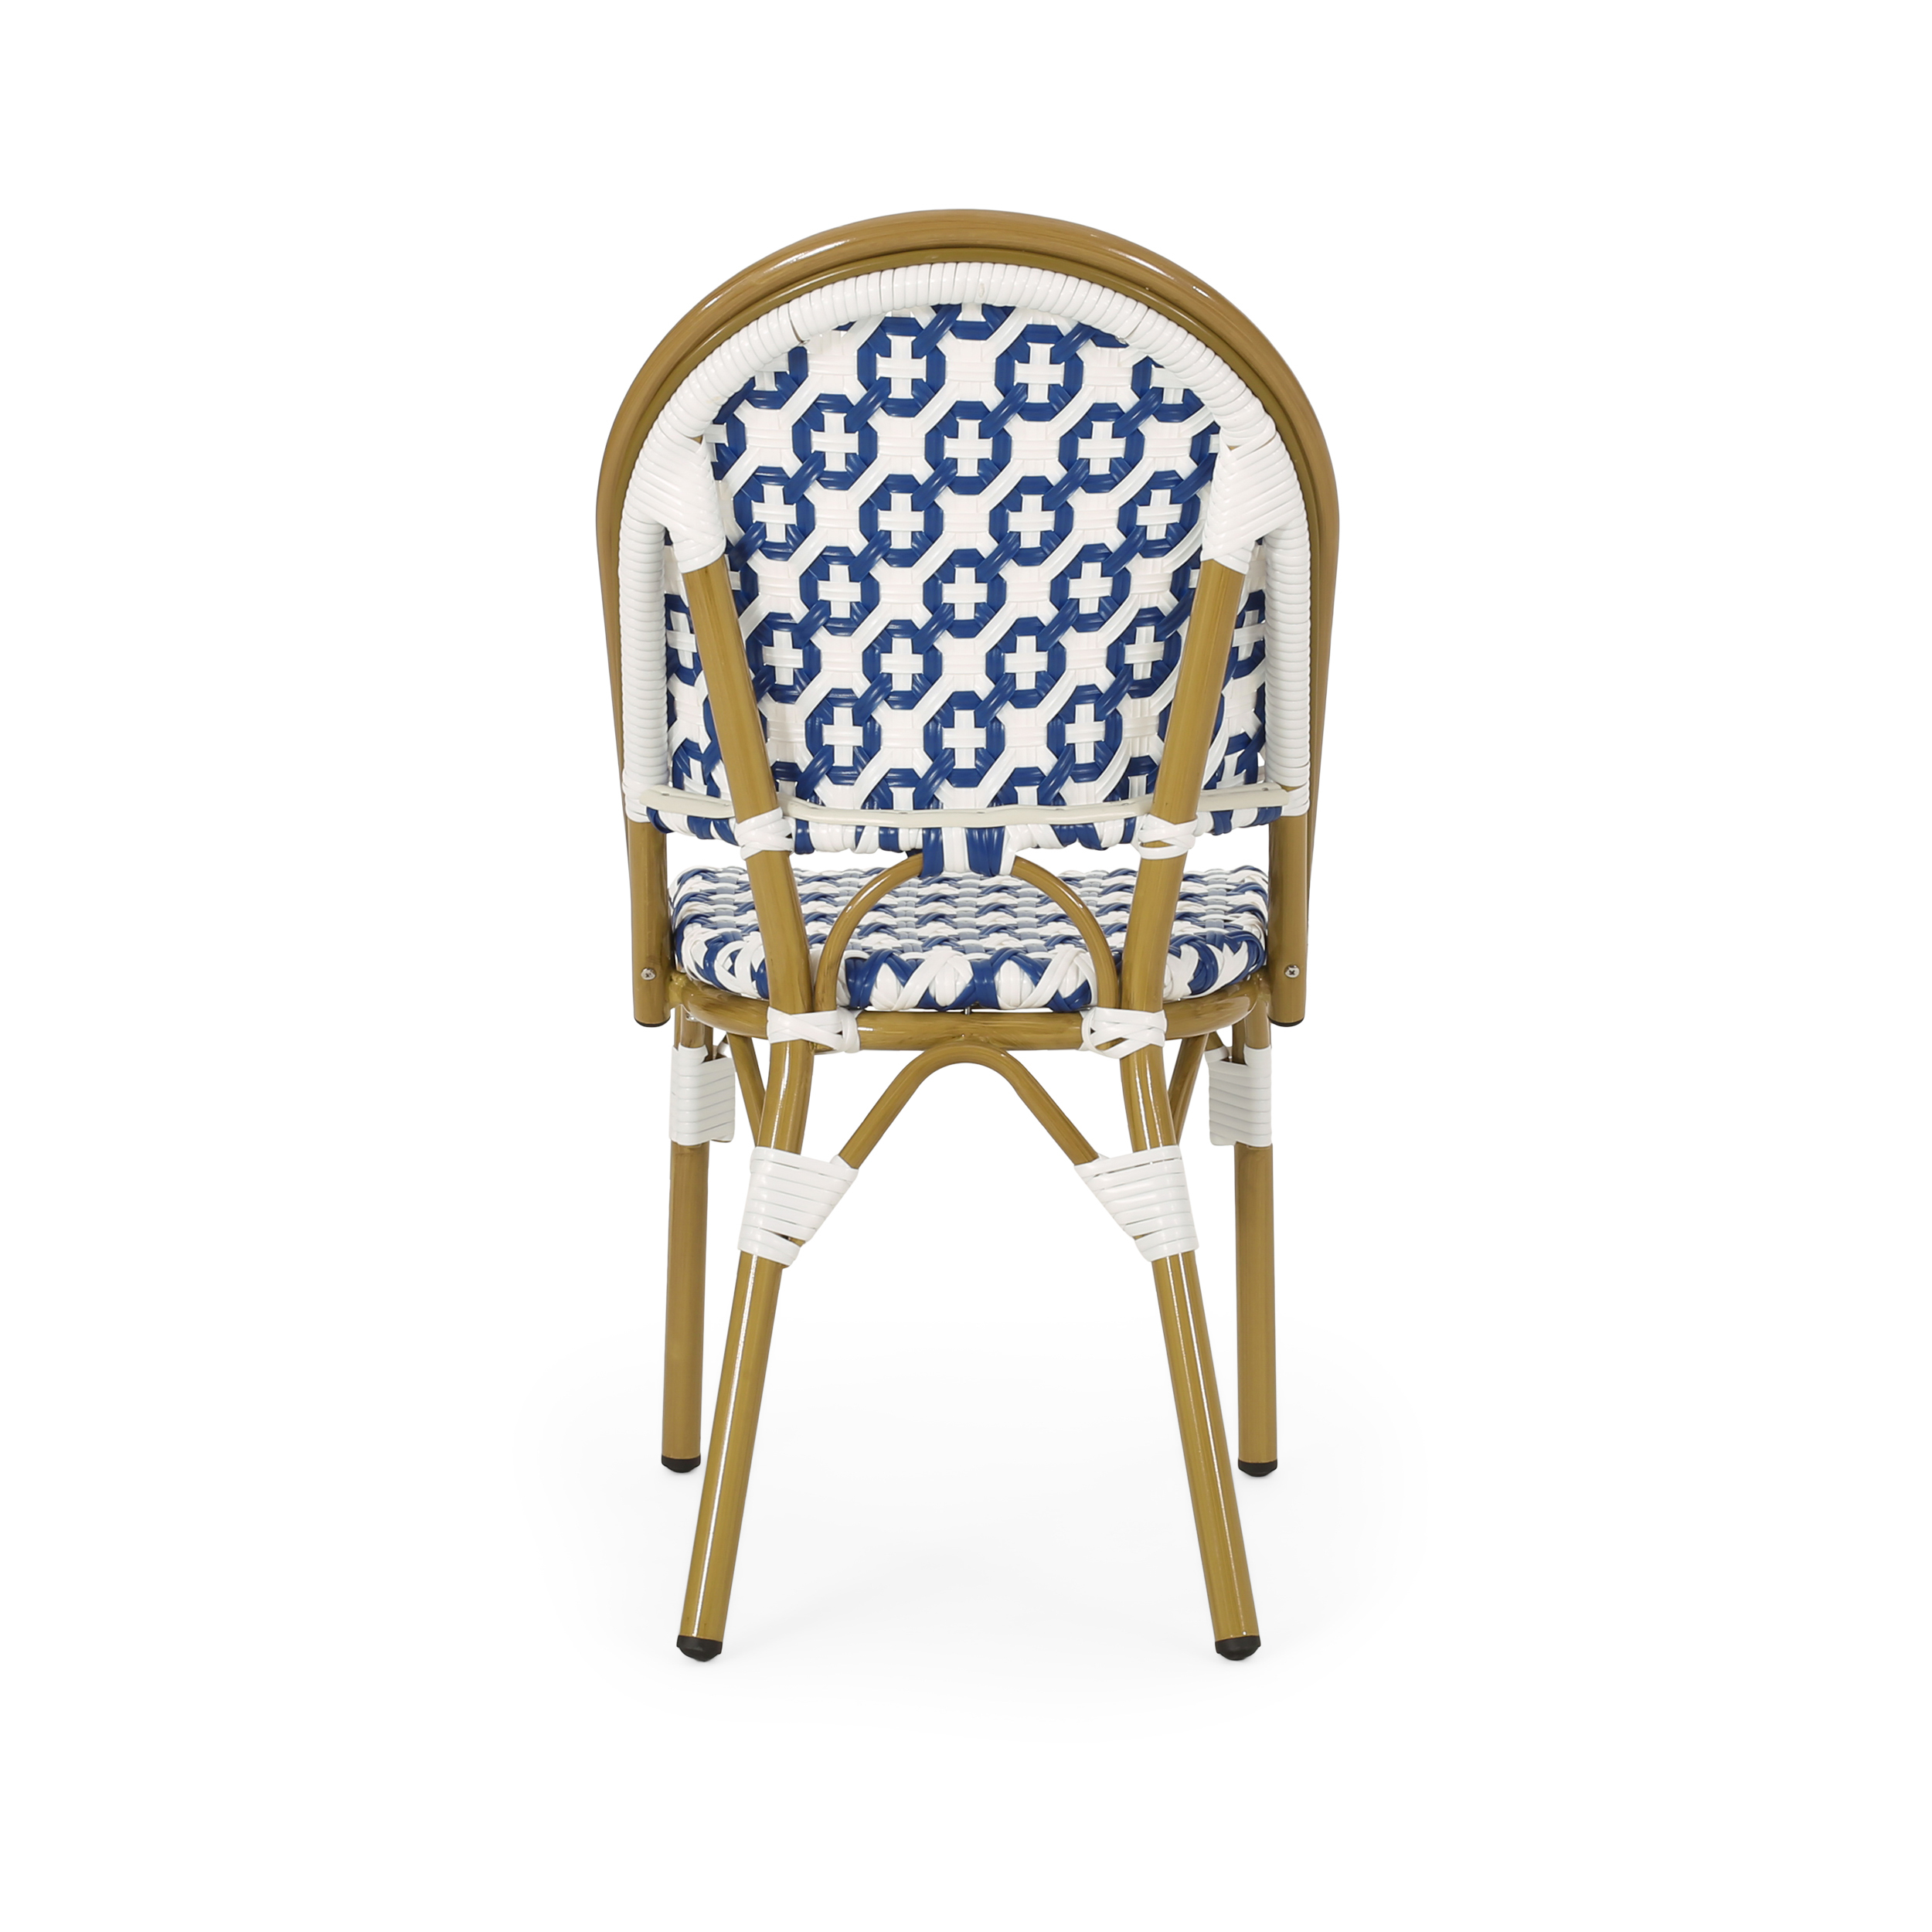 Noble House Louna Aluminum & Faux Rattan Bistro Chairs in Blue/White (Set of 4) - image 4 of 8